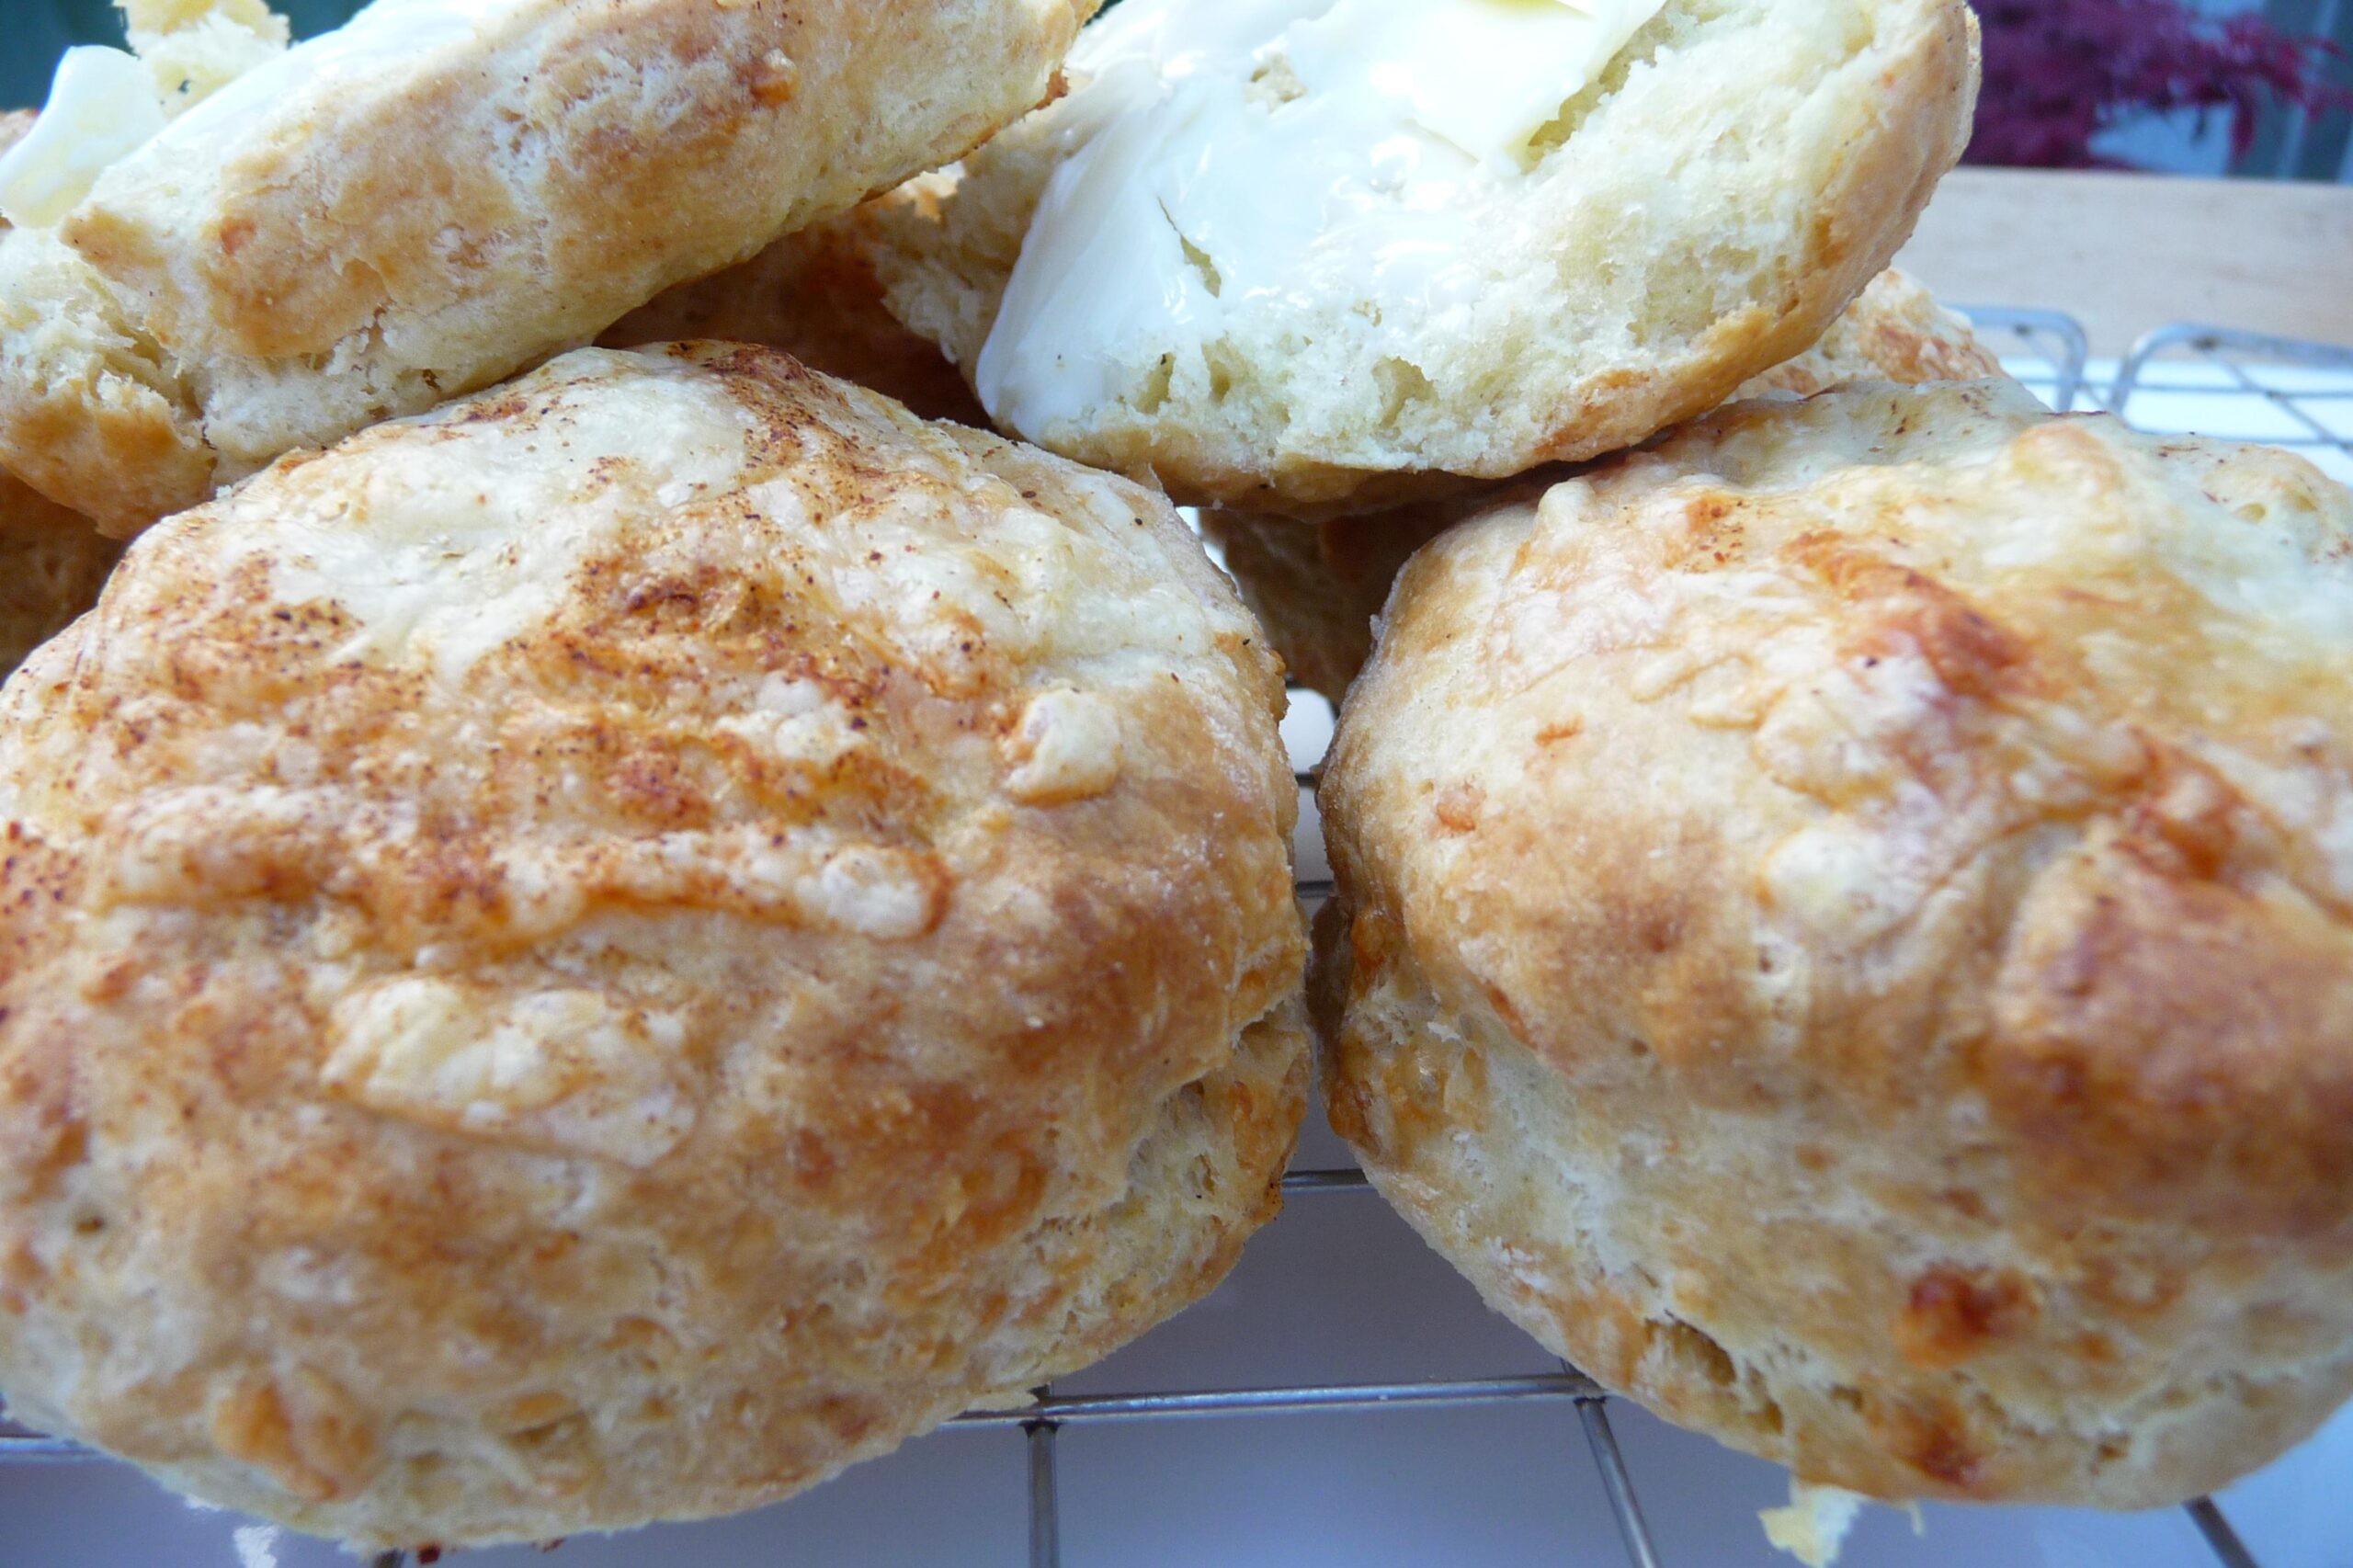  Golden brown and delicious, these cheese scones are a real treat